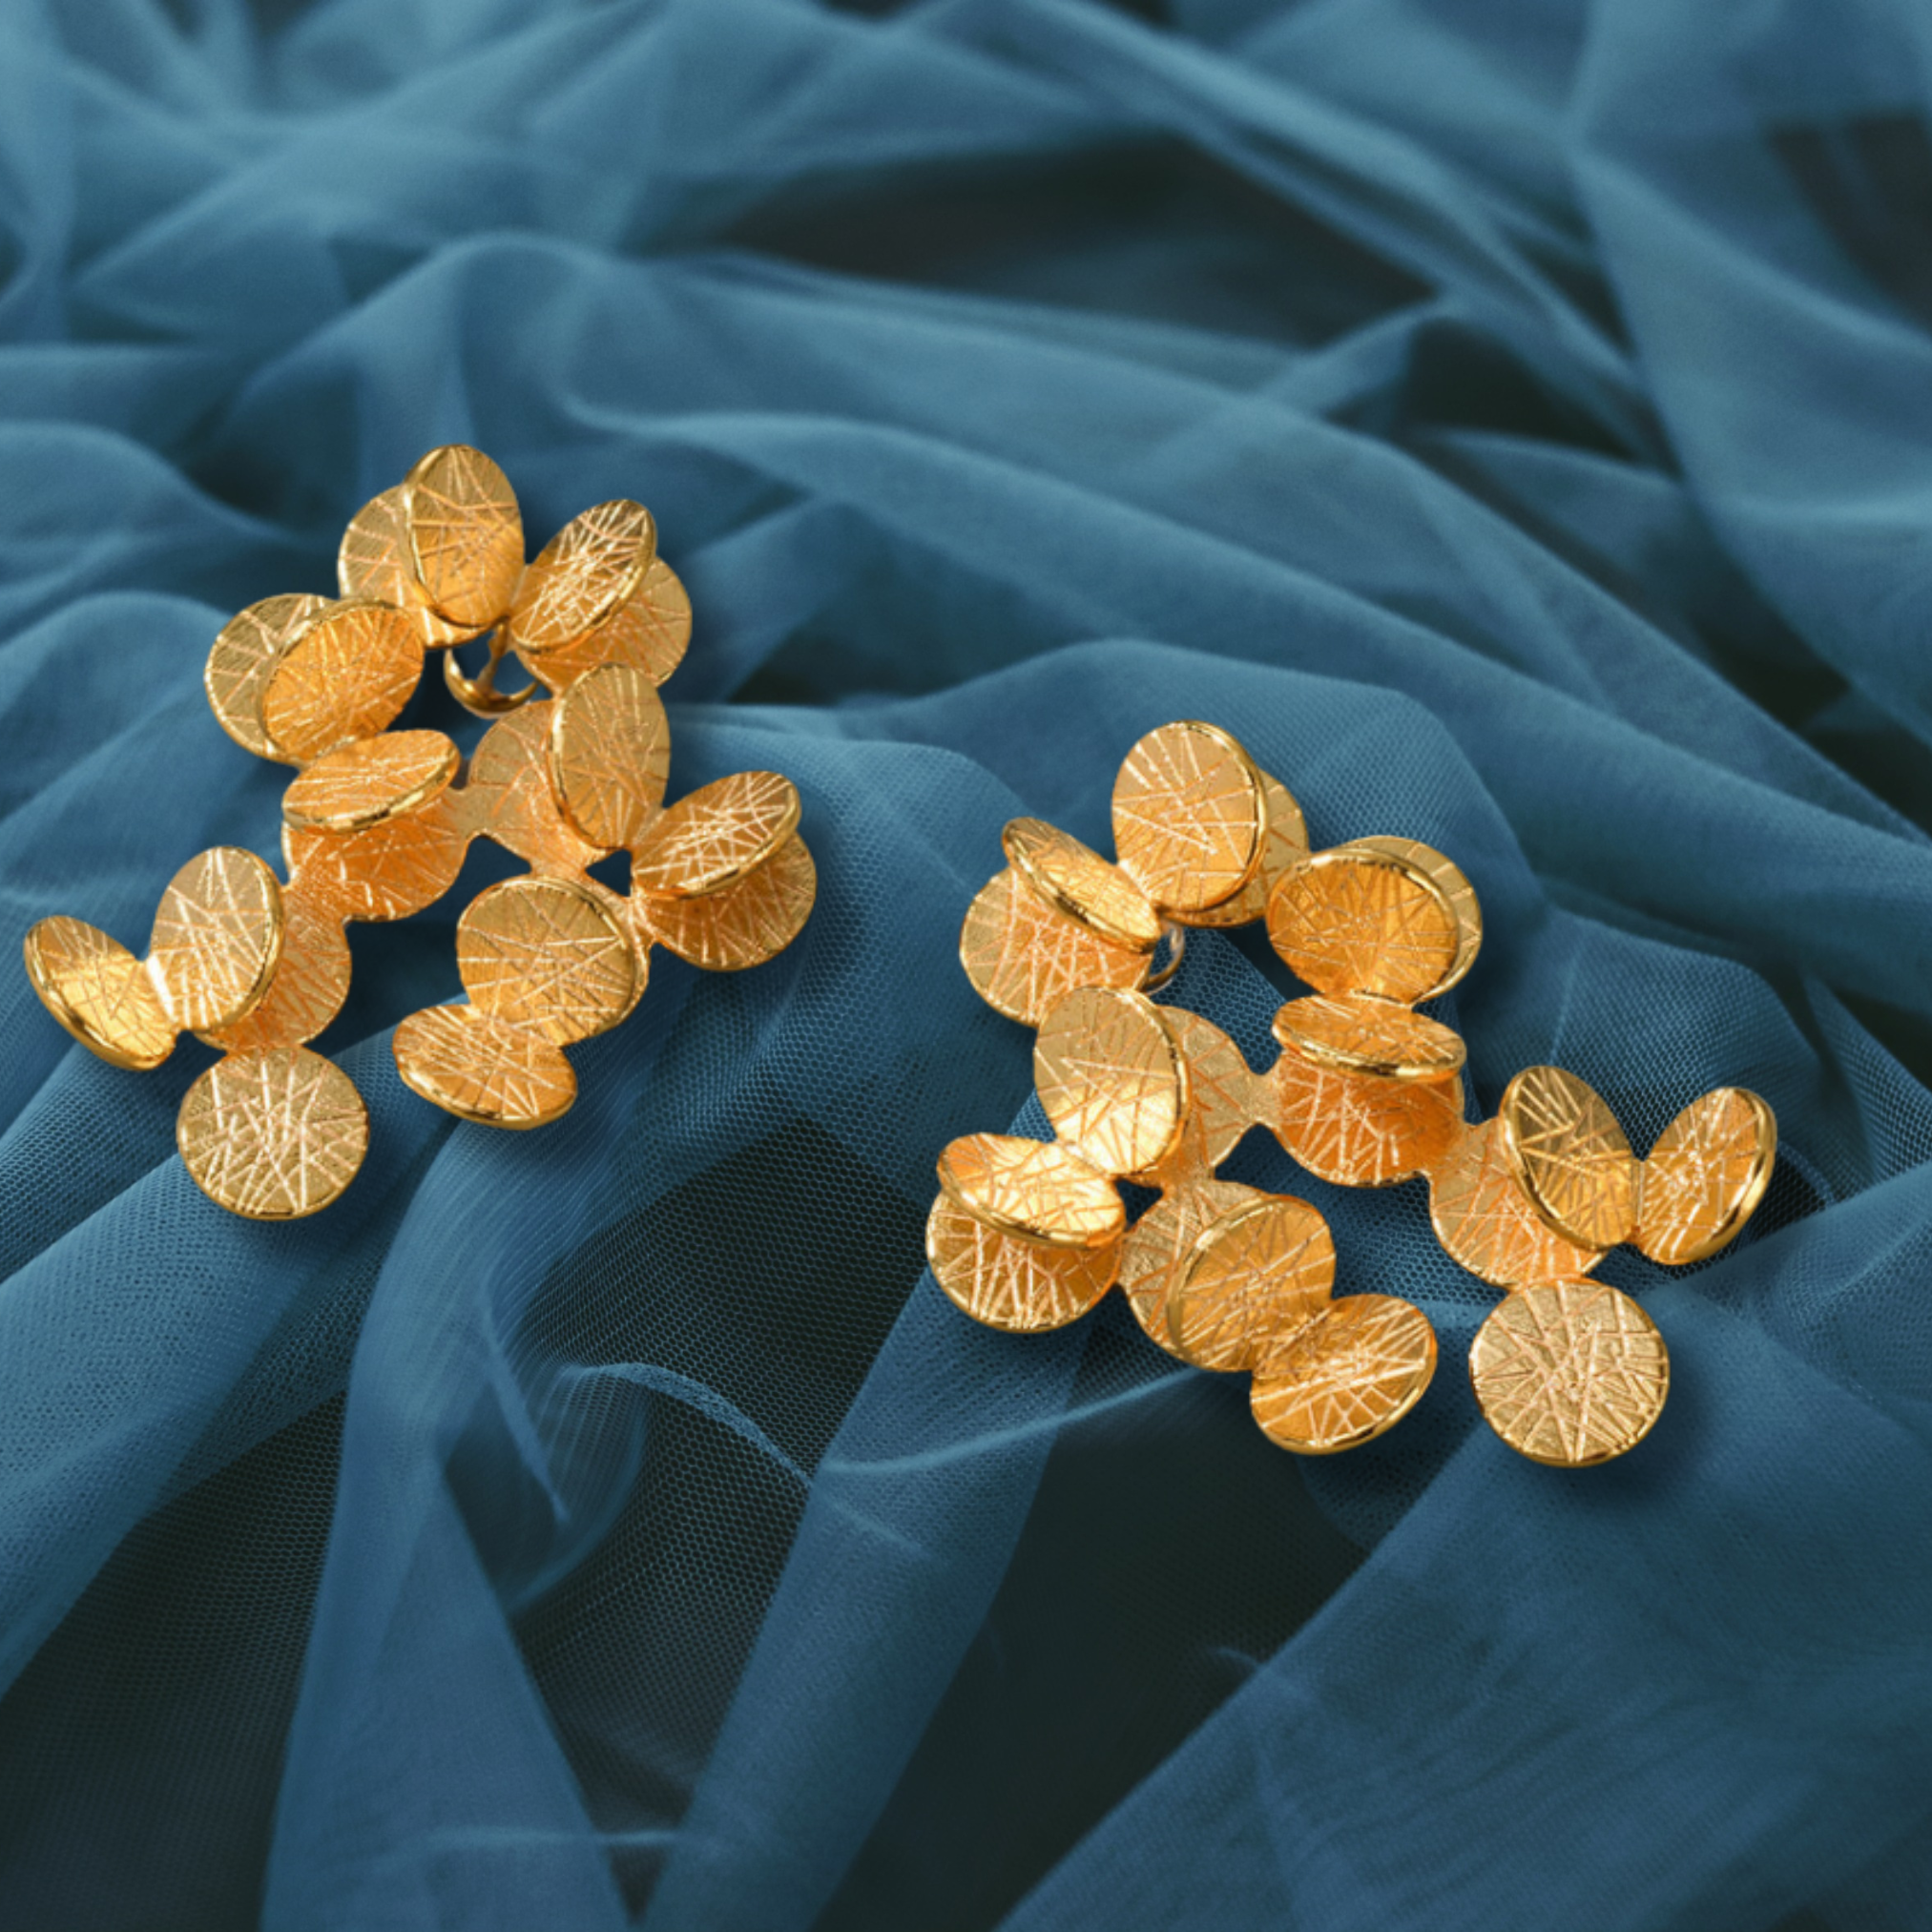 gold coins on a blue fabric